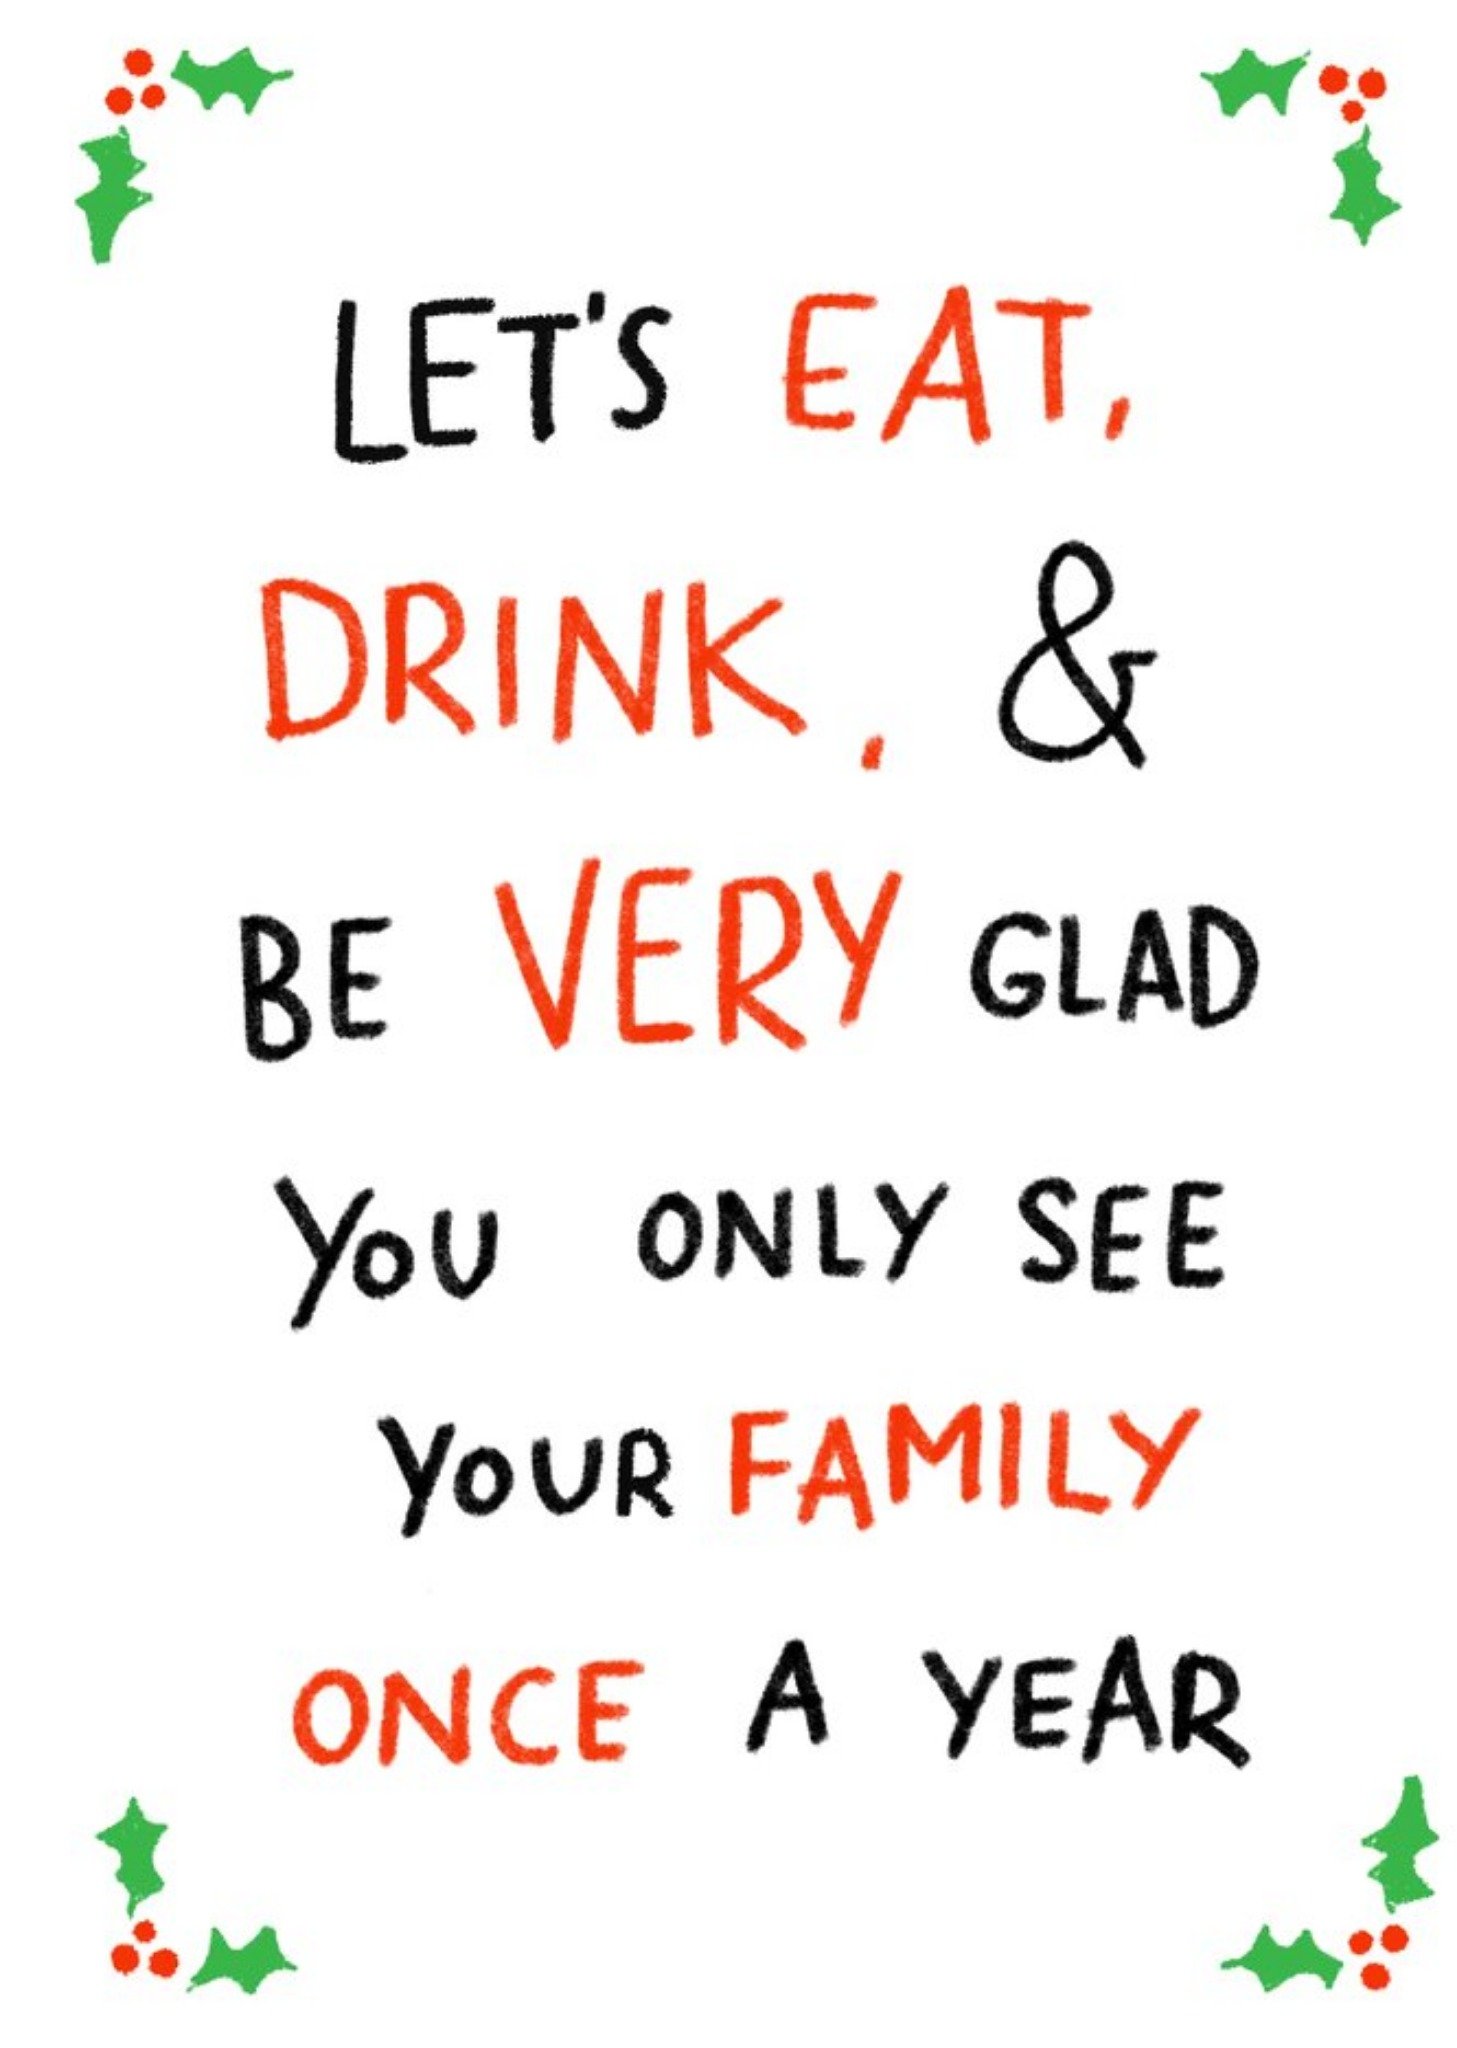 Moonpig Funny Christmas Card Let's Eat, Drink & Be Very Glad, Large